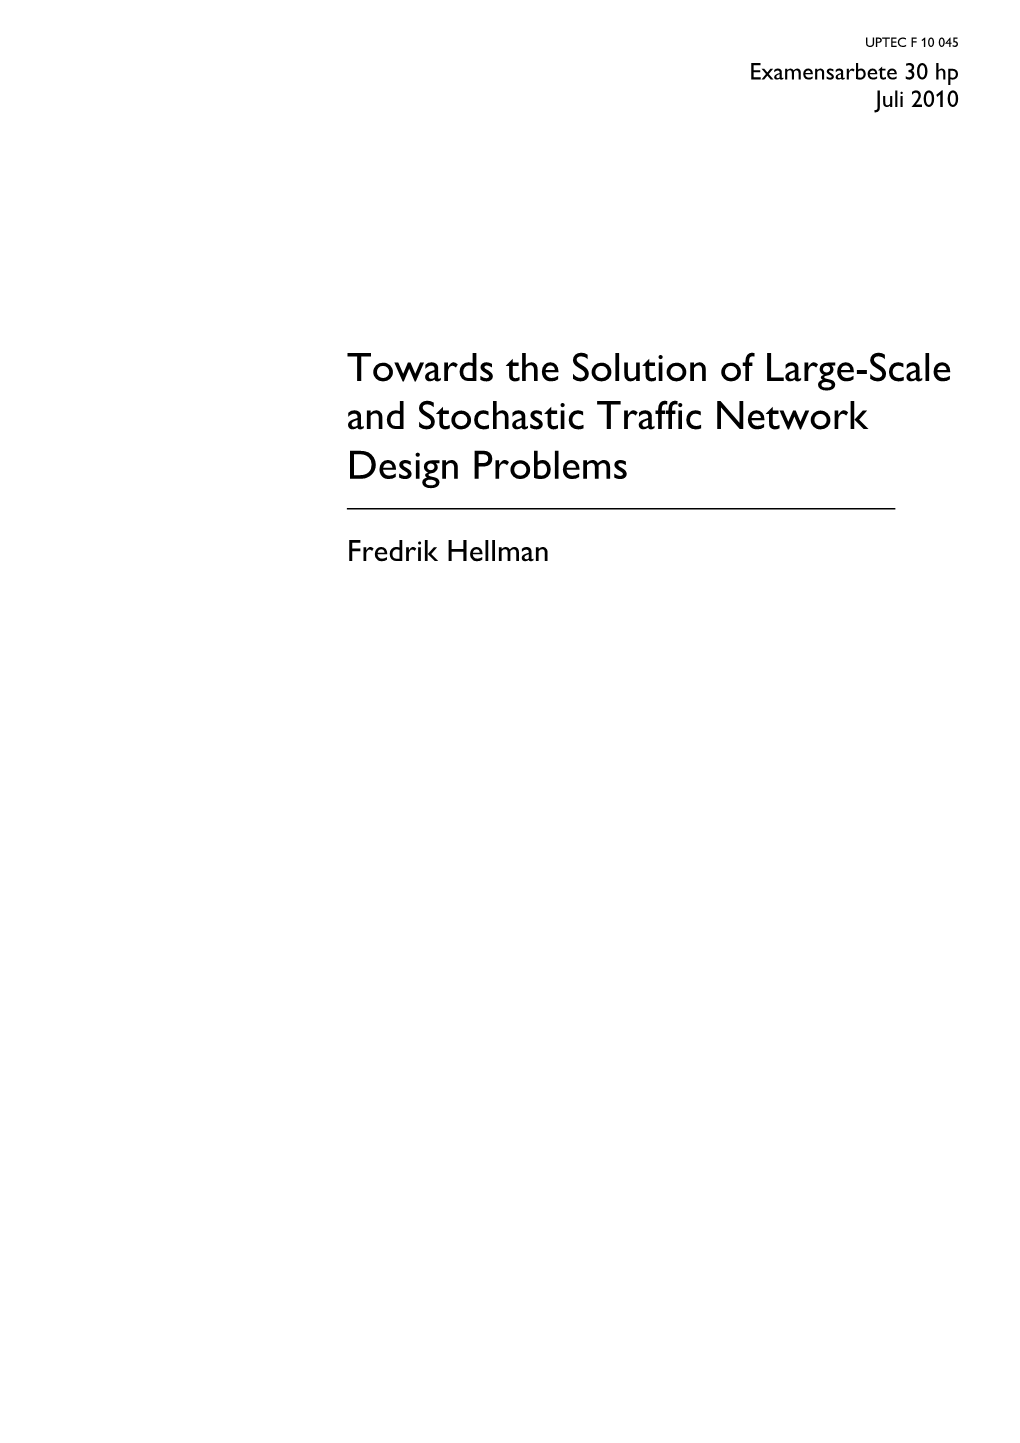 Towards the Solution of Large-Scale and Stochastic Traffic Network Design Problems